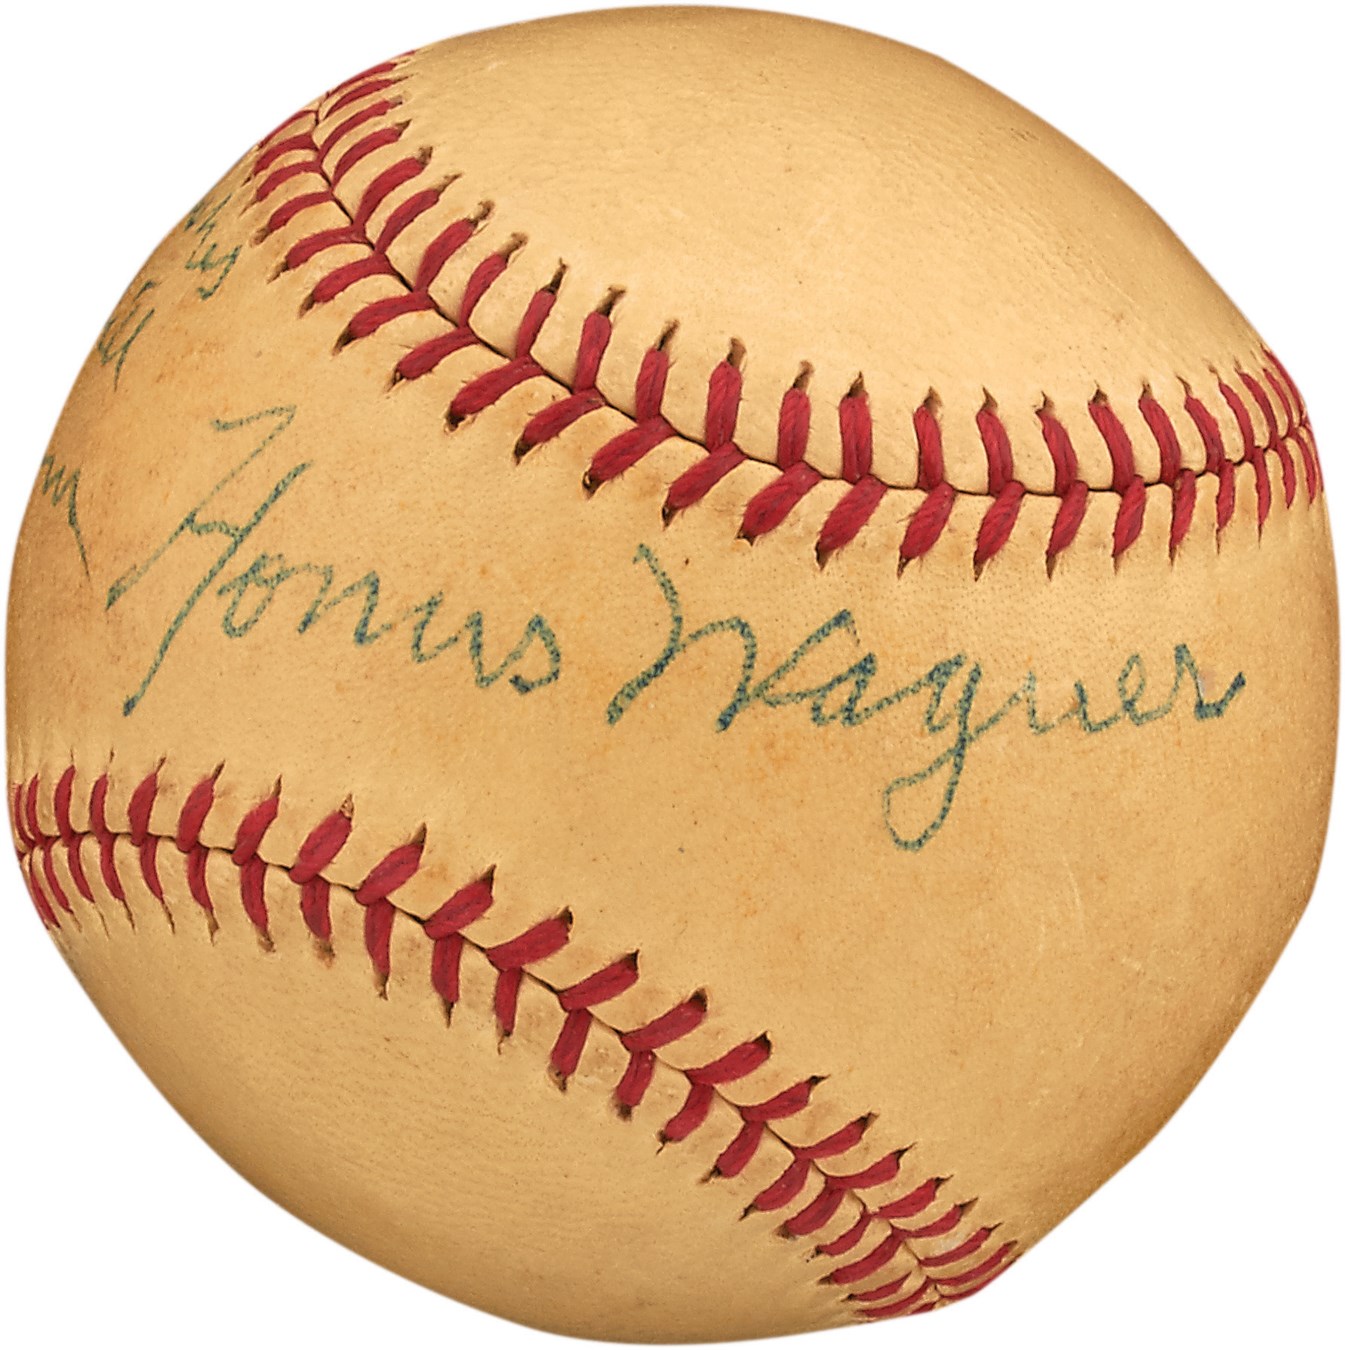 - Exceptional Honus Wagner Single-Signed Baseball with PSA/DNA Graded "7" Signature